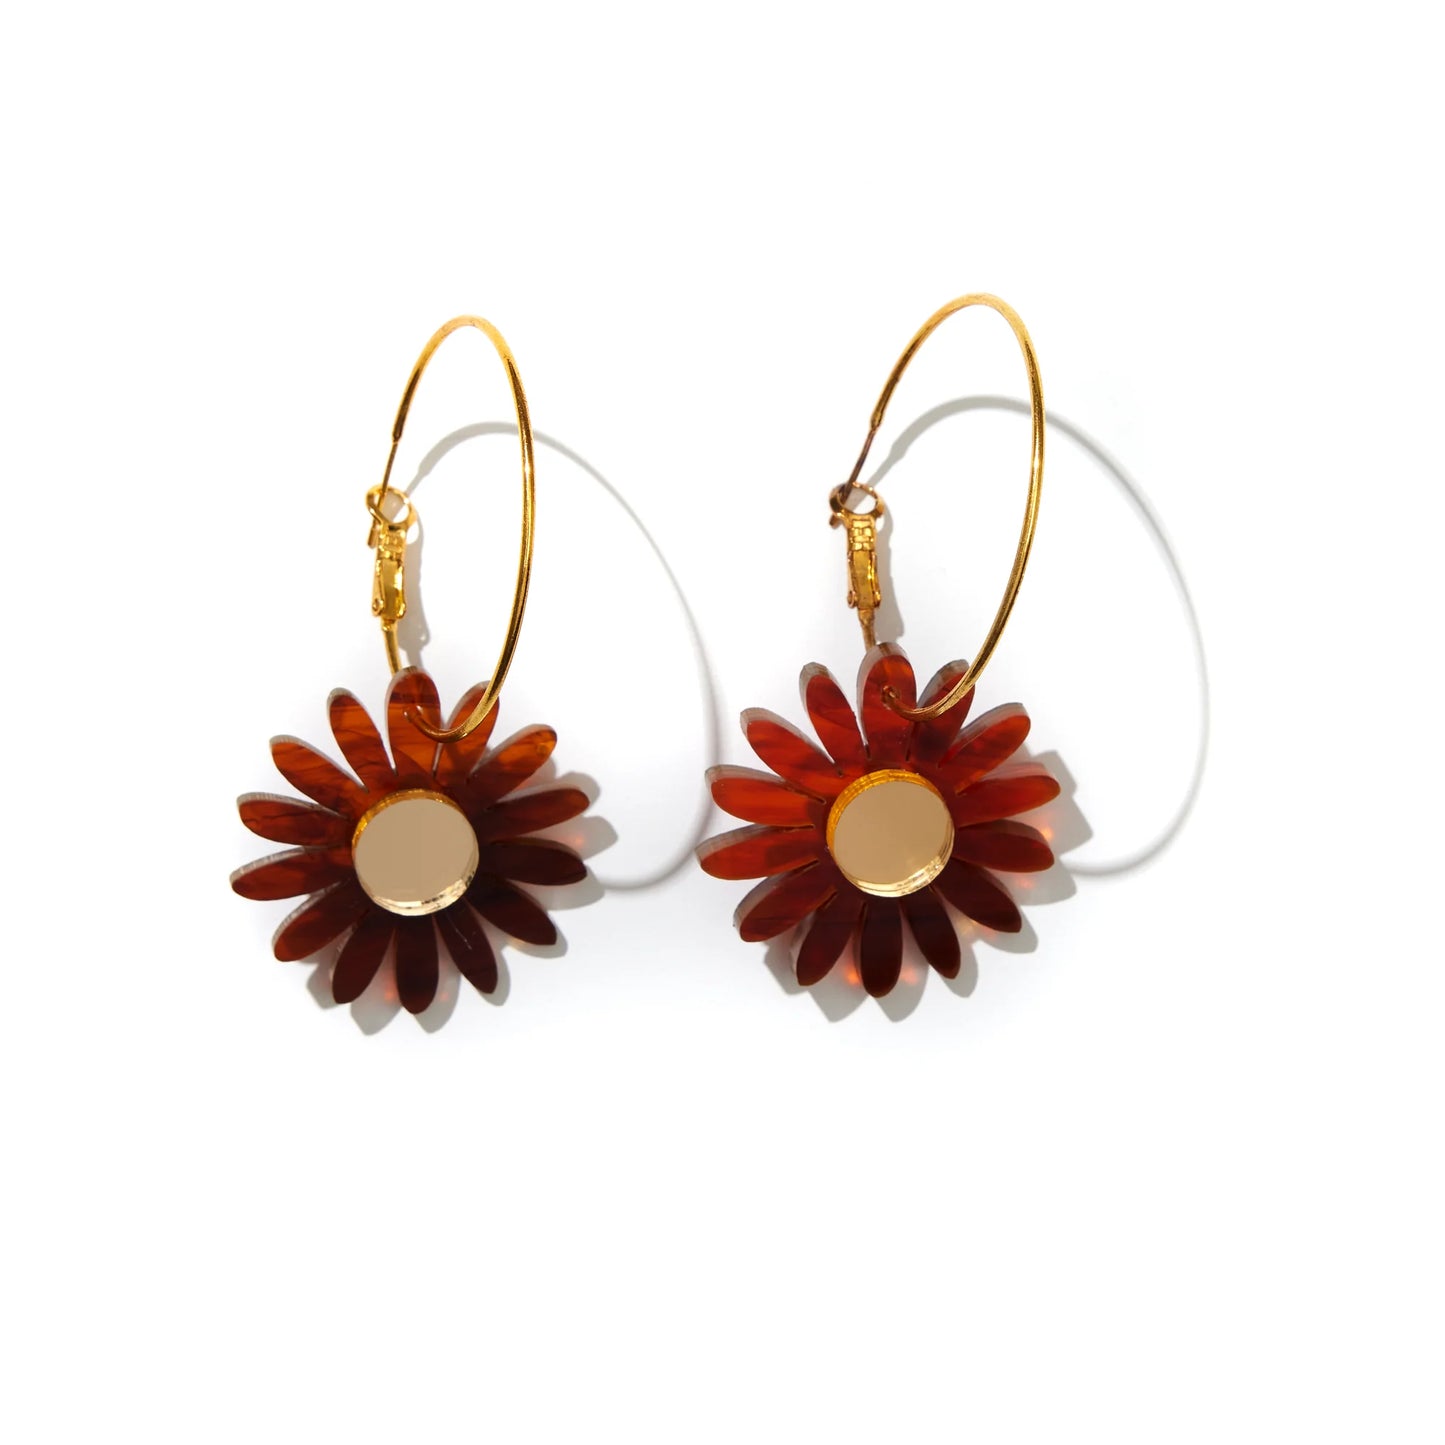 Emeldo Daisy Hoops in Tort Brown and Gold